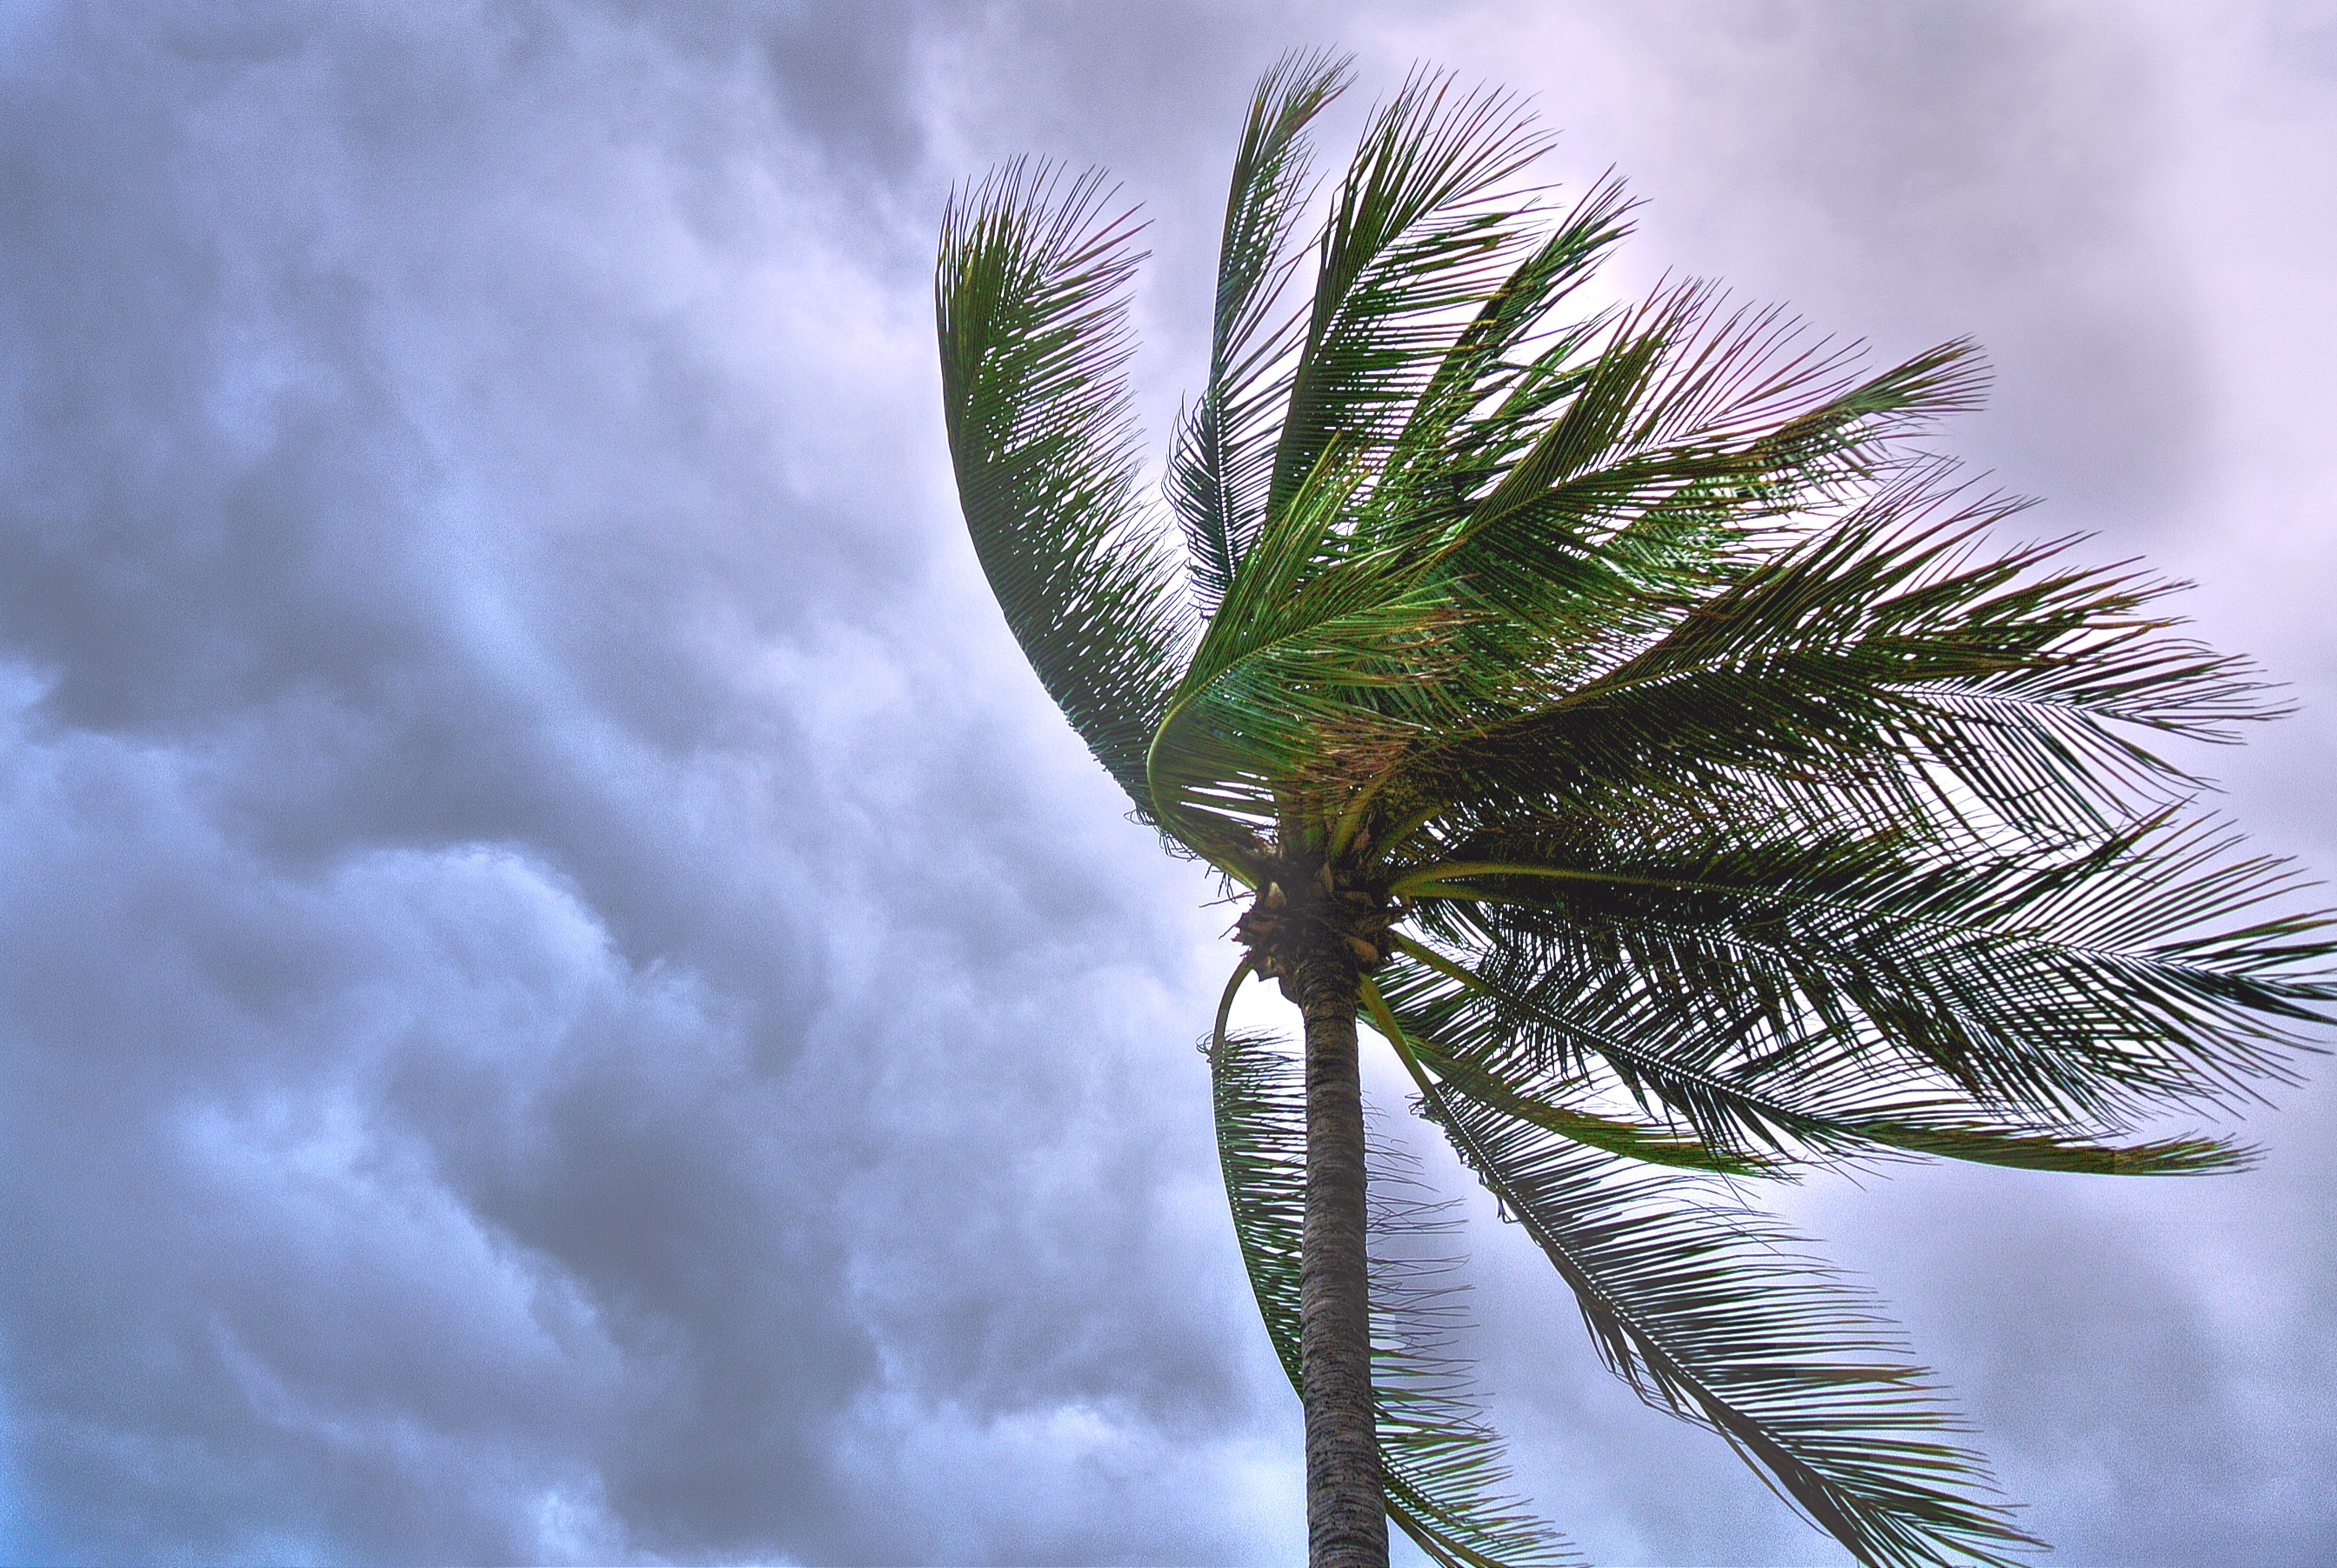 Palm tree blowing in an approaching storm